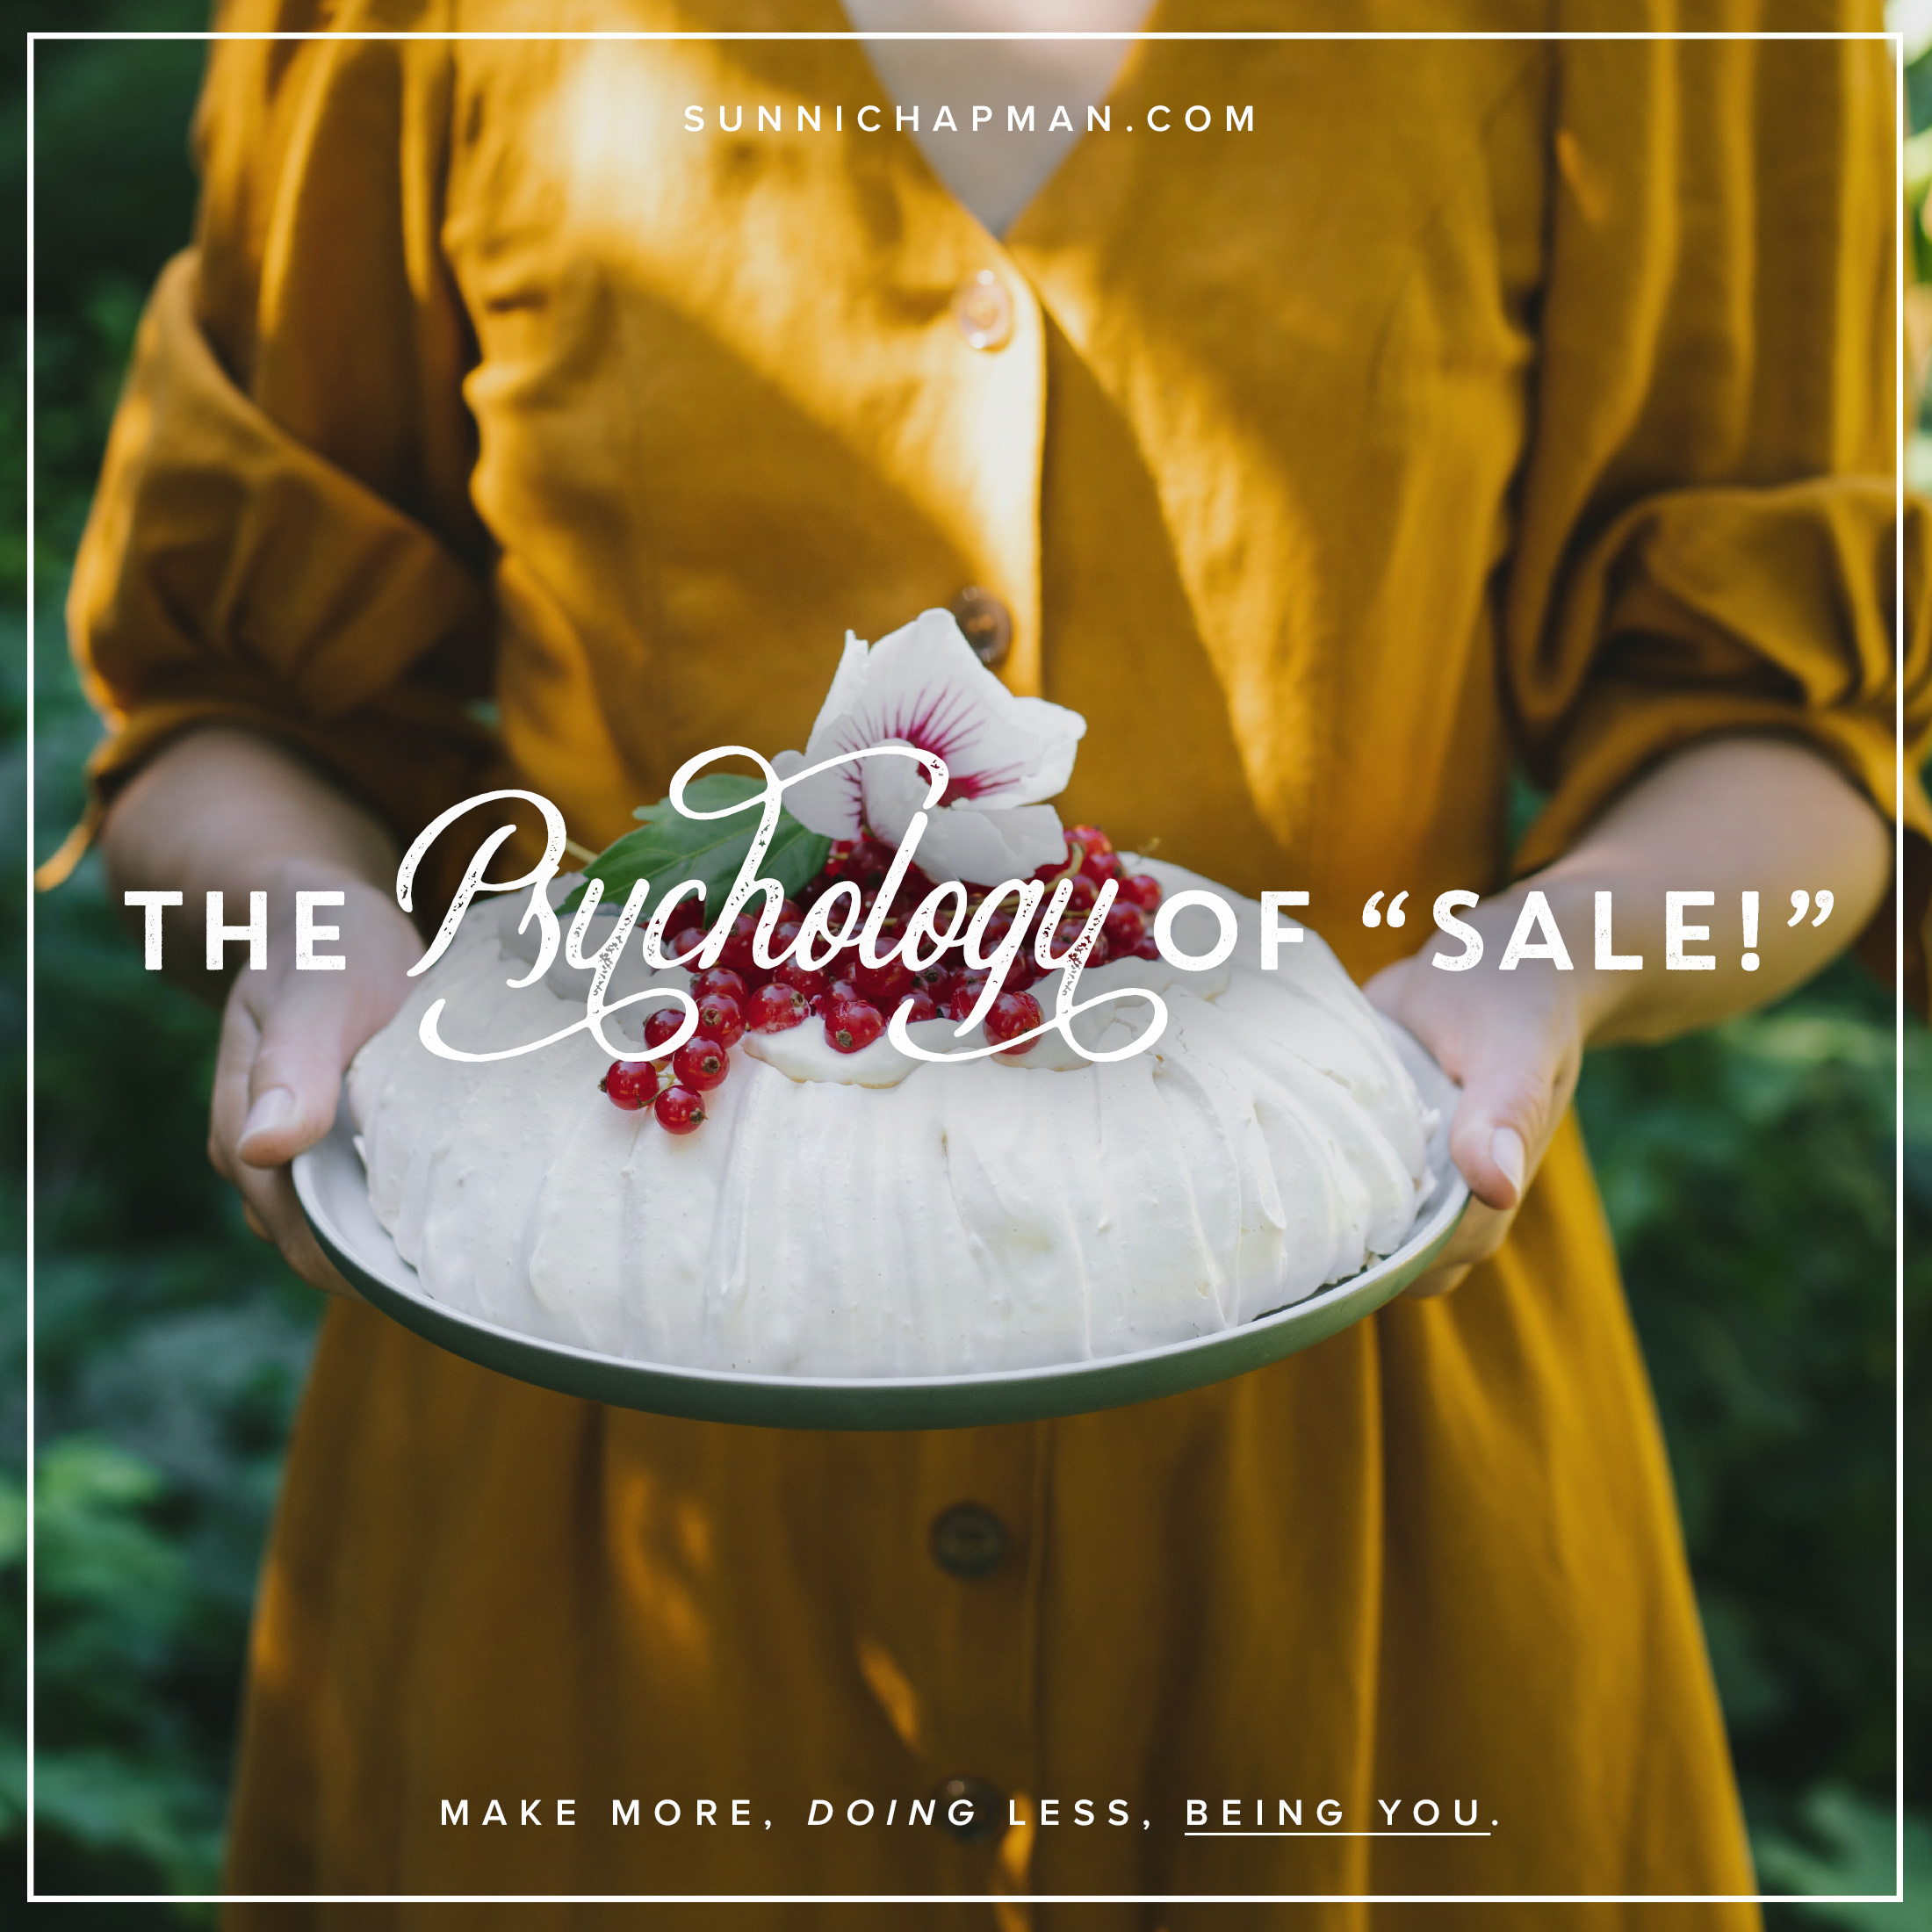 woman in orange dress holding cake with the text over the image: The Psychology Of “Sale!” 